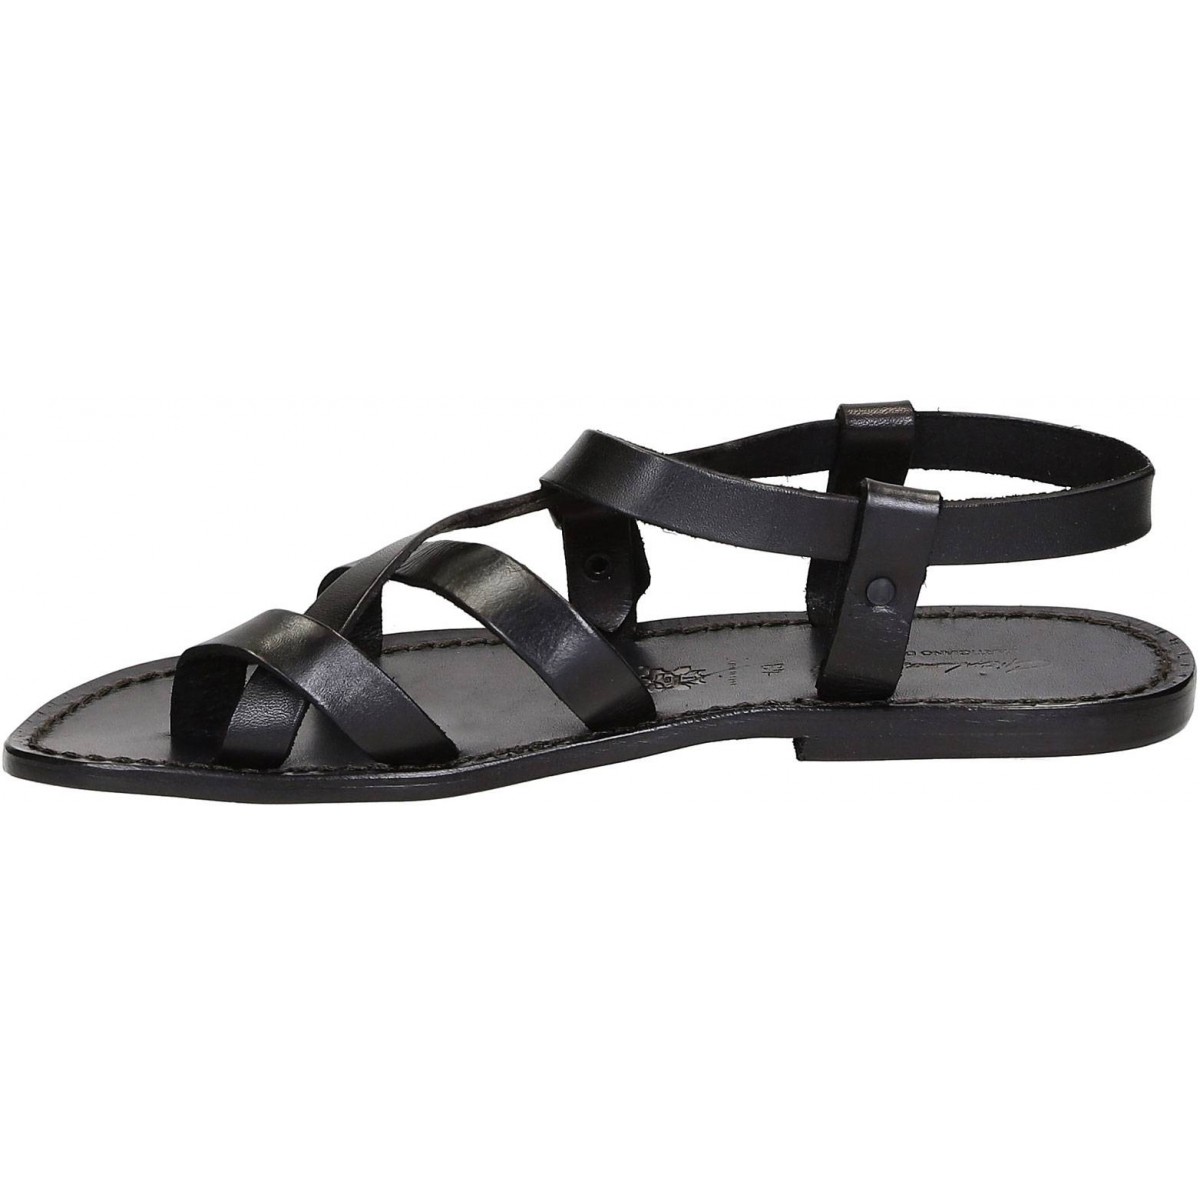 Gladiator sandals for men in black real calf leather | The leather ...